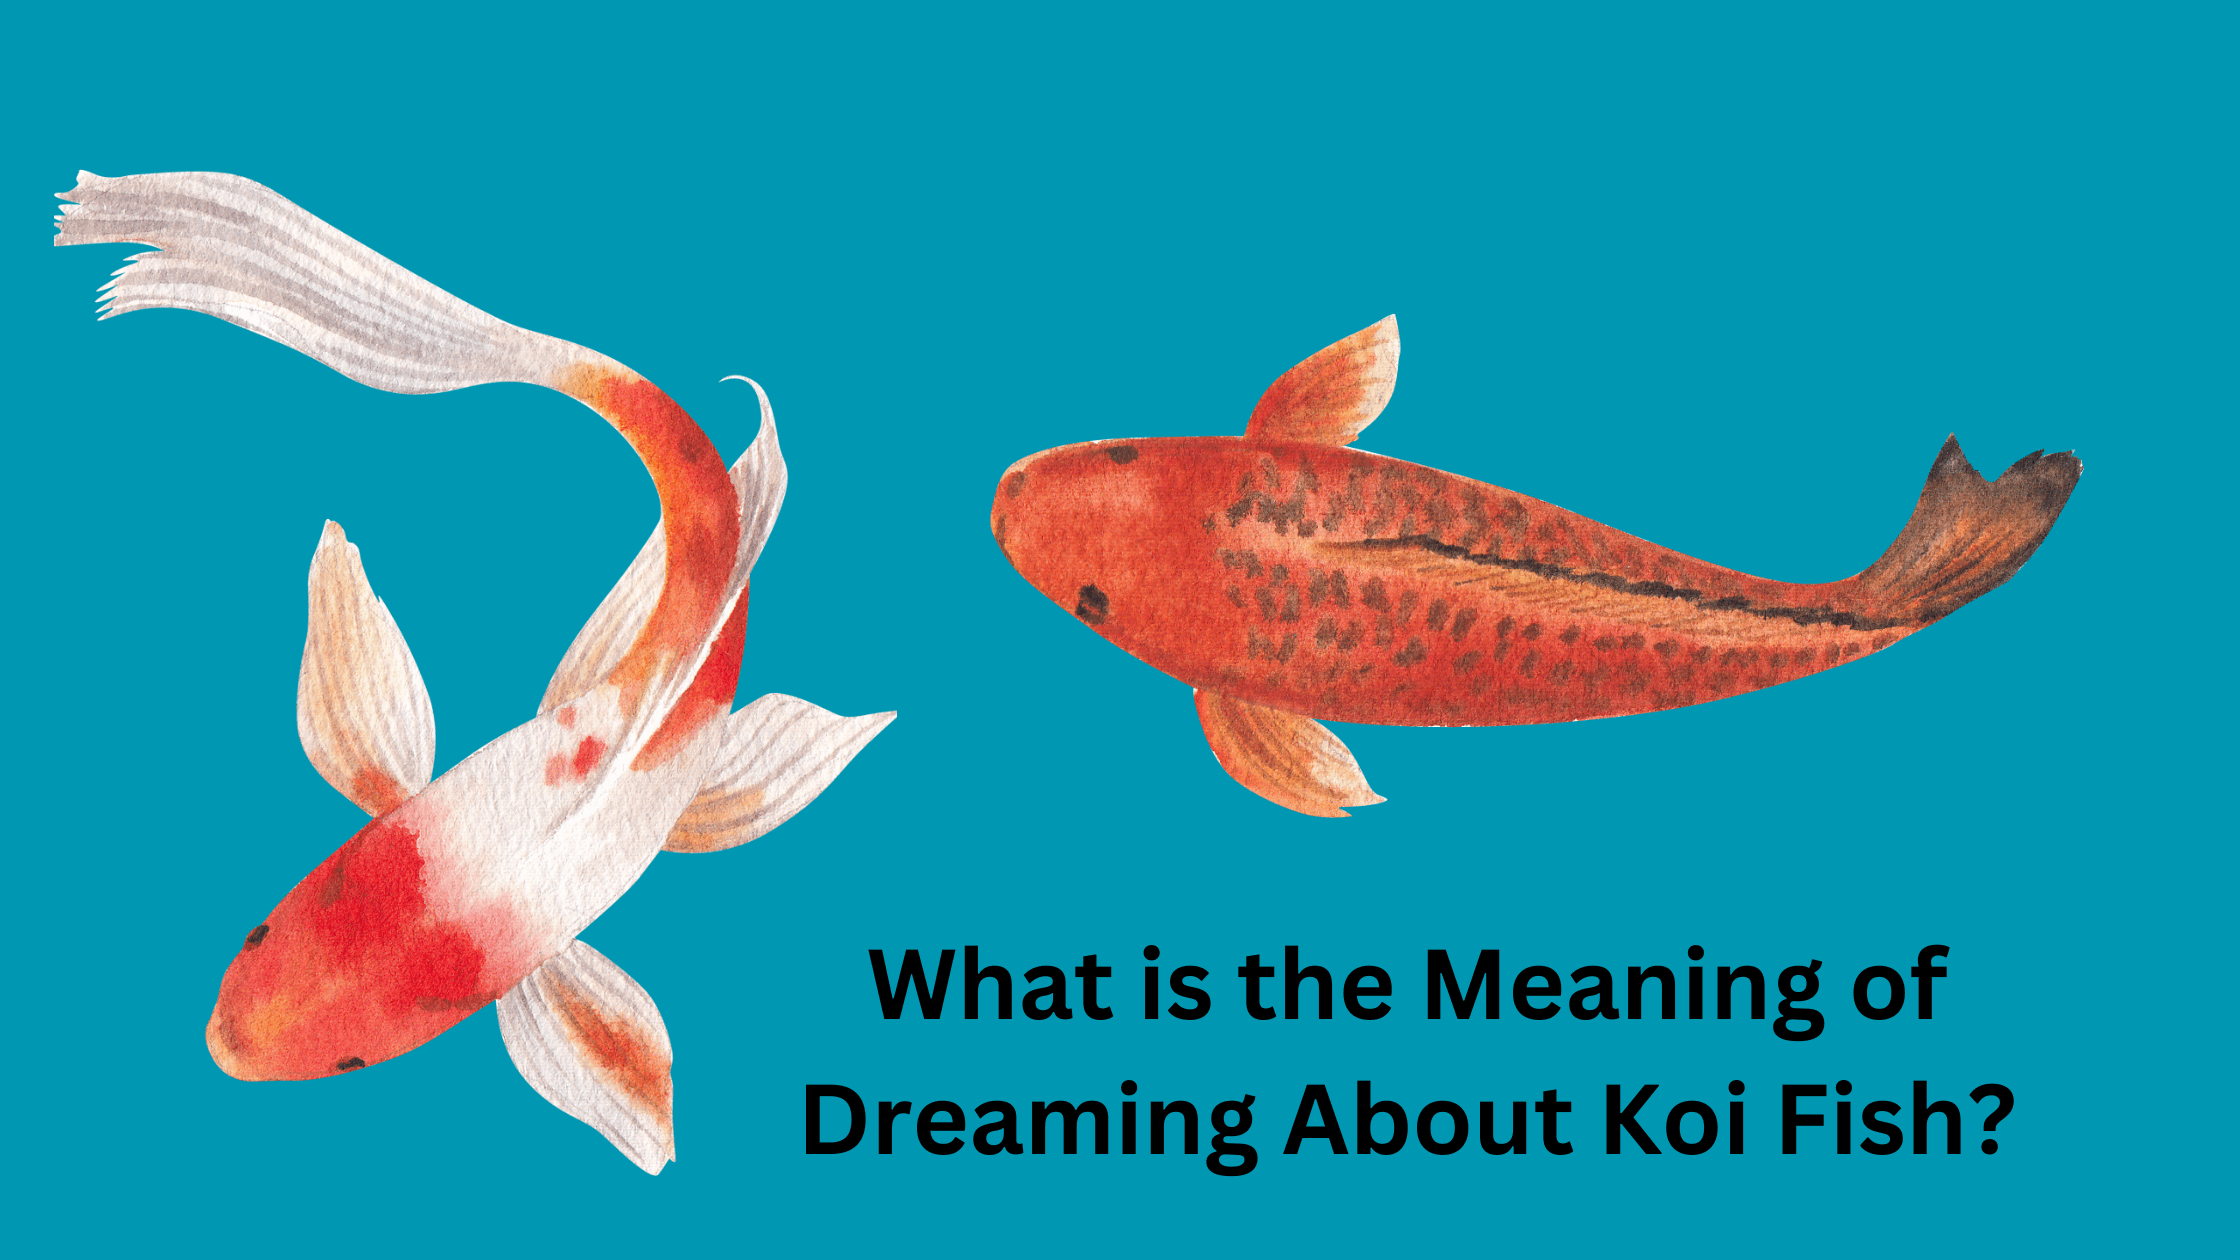 What is the Meaning of Dreaming About Koi Fish